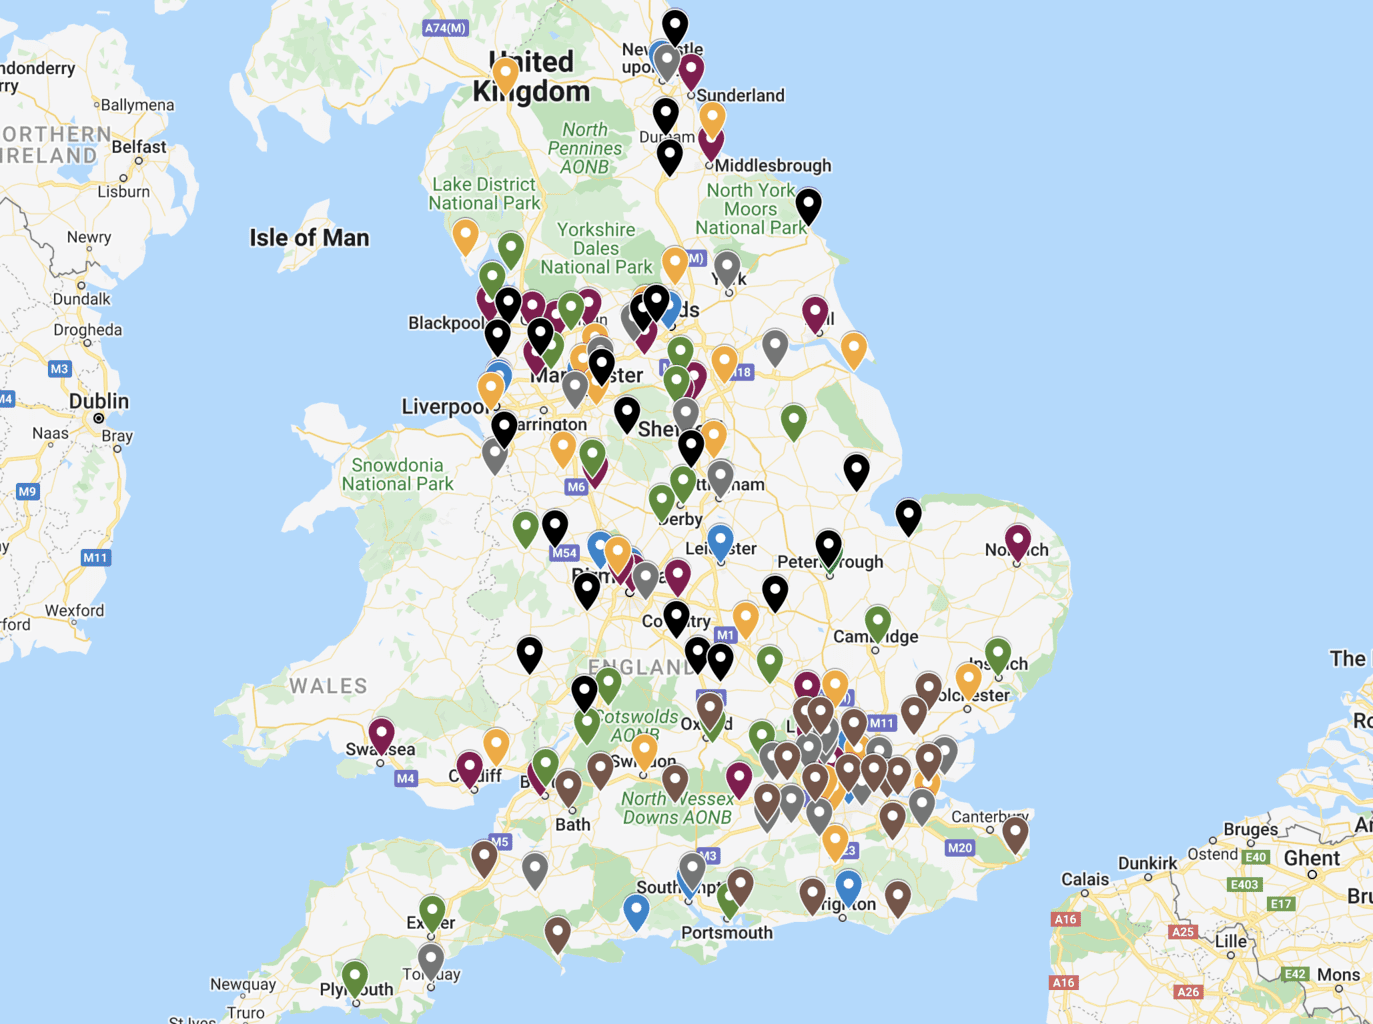 Map showing the English football clubs for the 2022-23 season